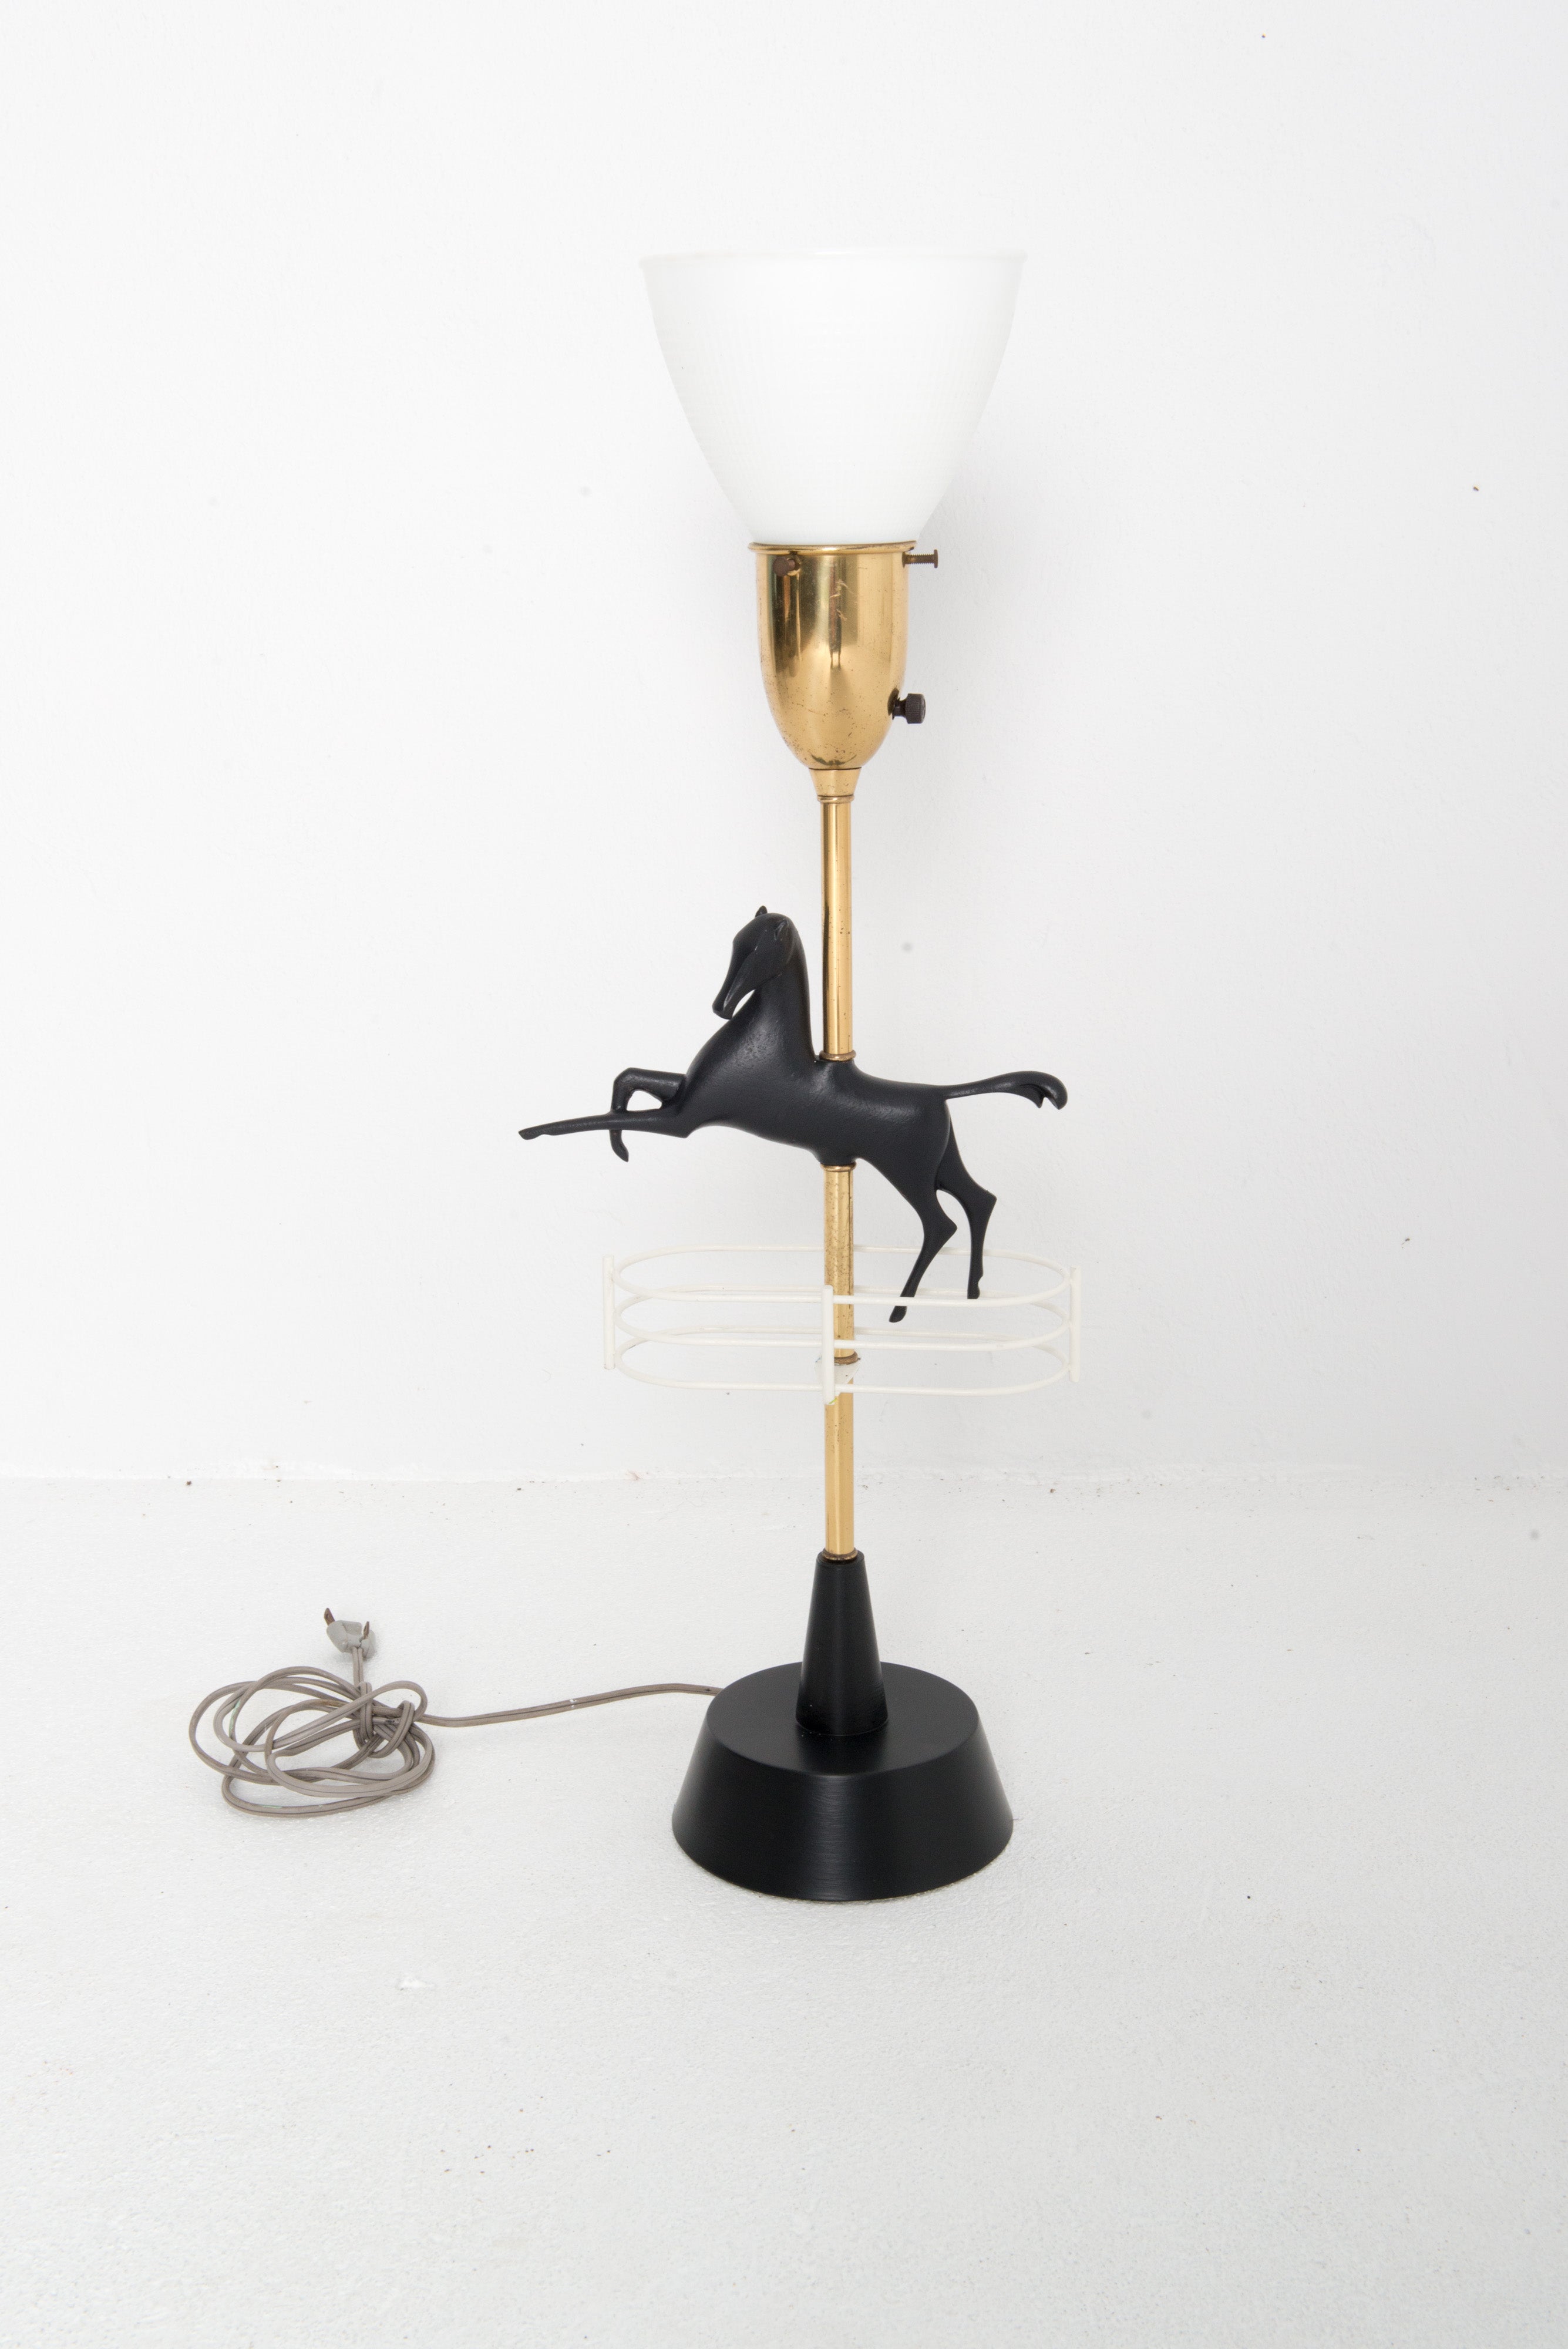 Mid century modern brass and painted metal leaping horse table lamp. Low cylindrical shade and glass diffuser are original to the lamp. Shade is 19